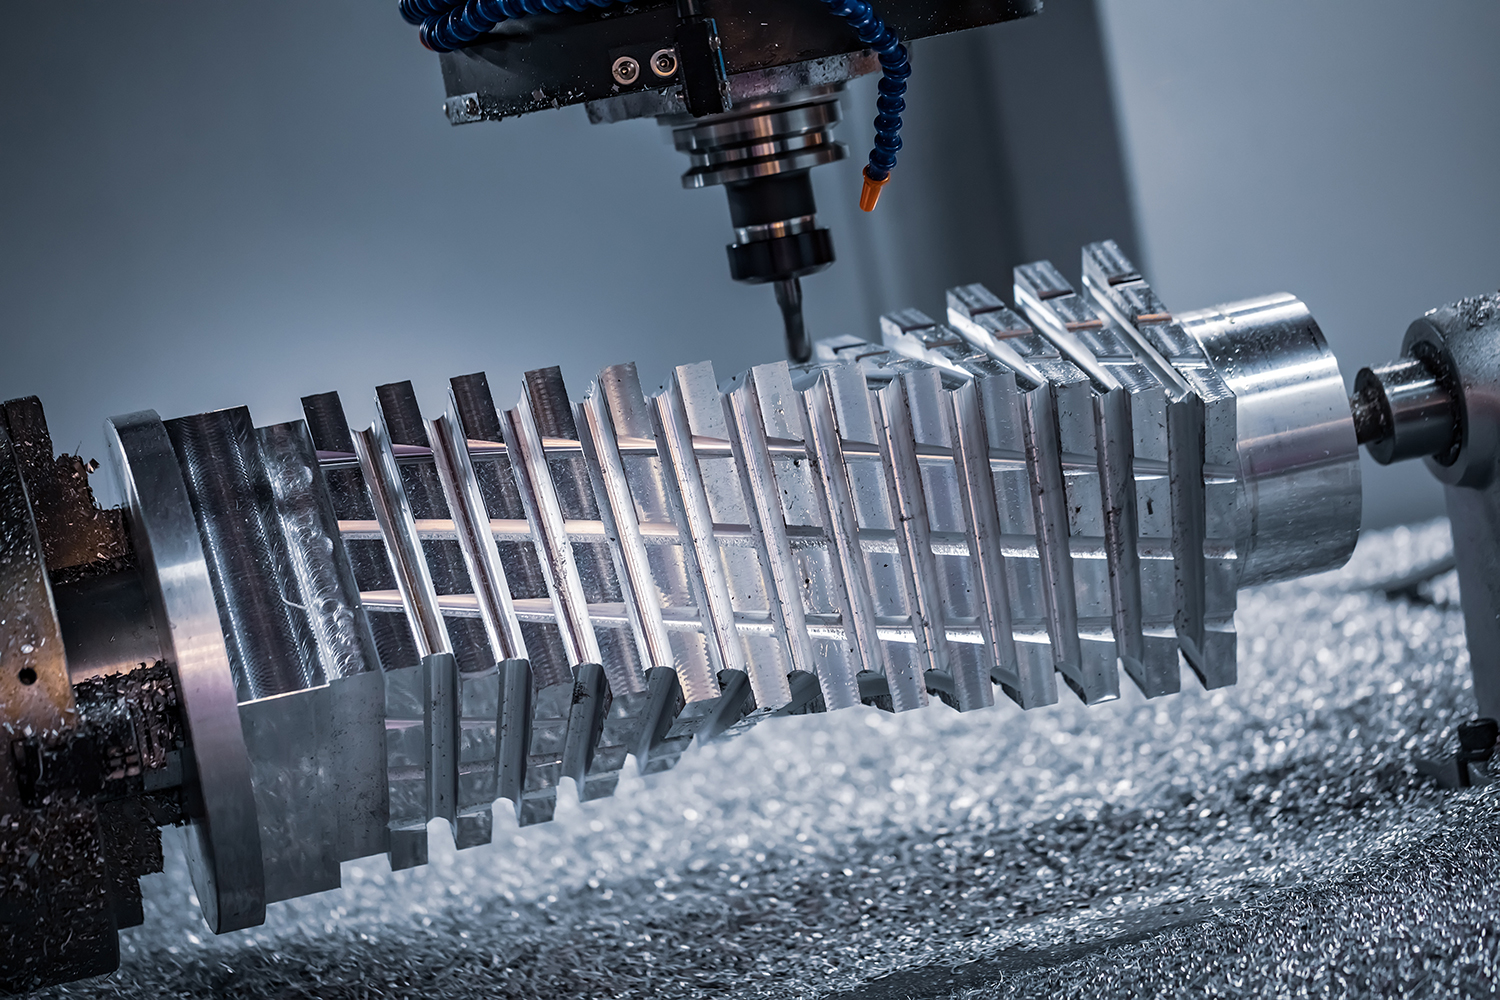 How Are CNC Machines Impacting Modern Manufacturing